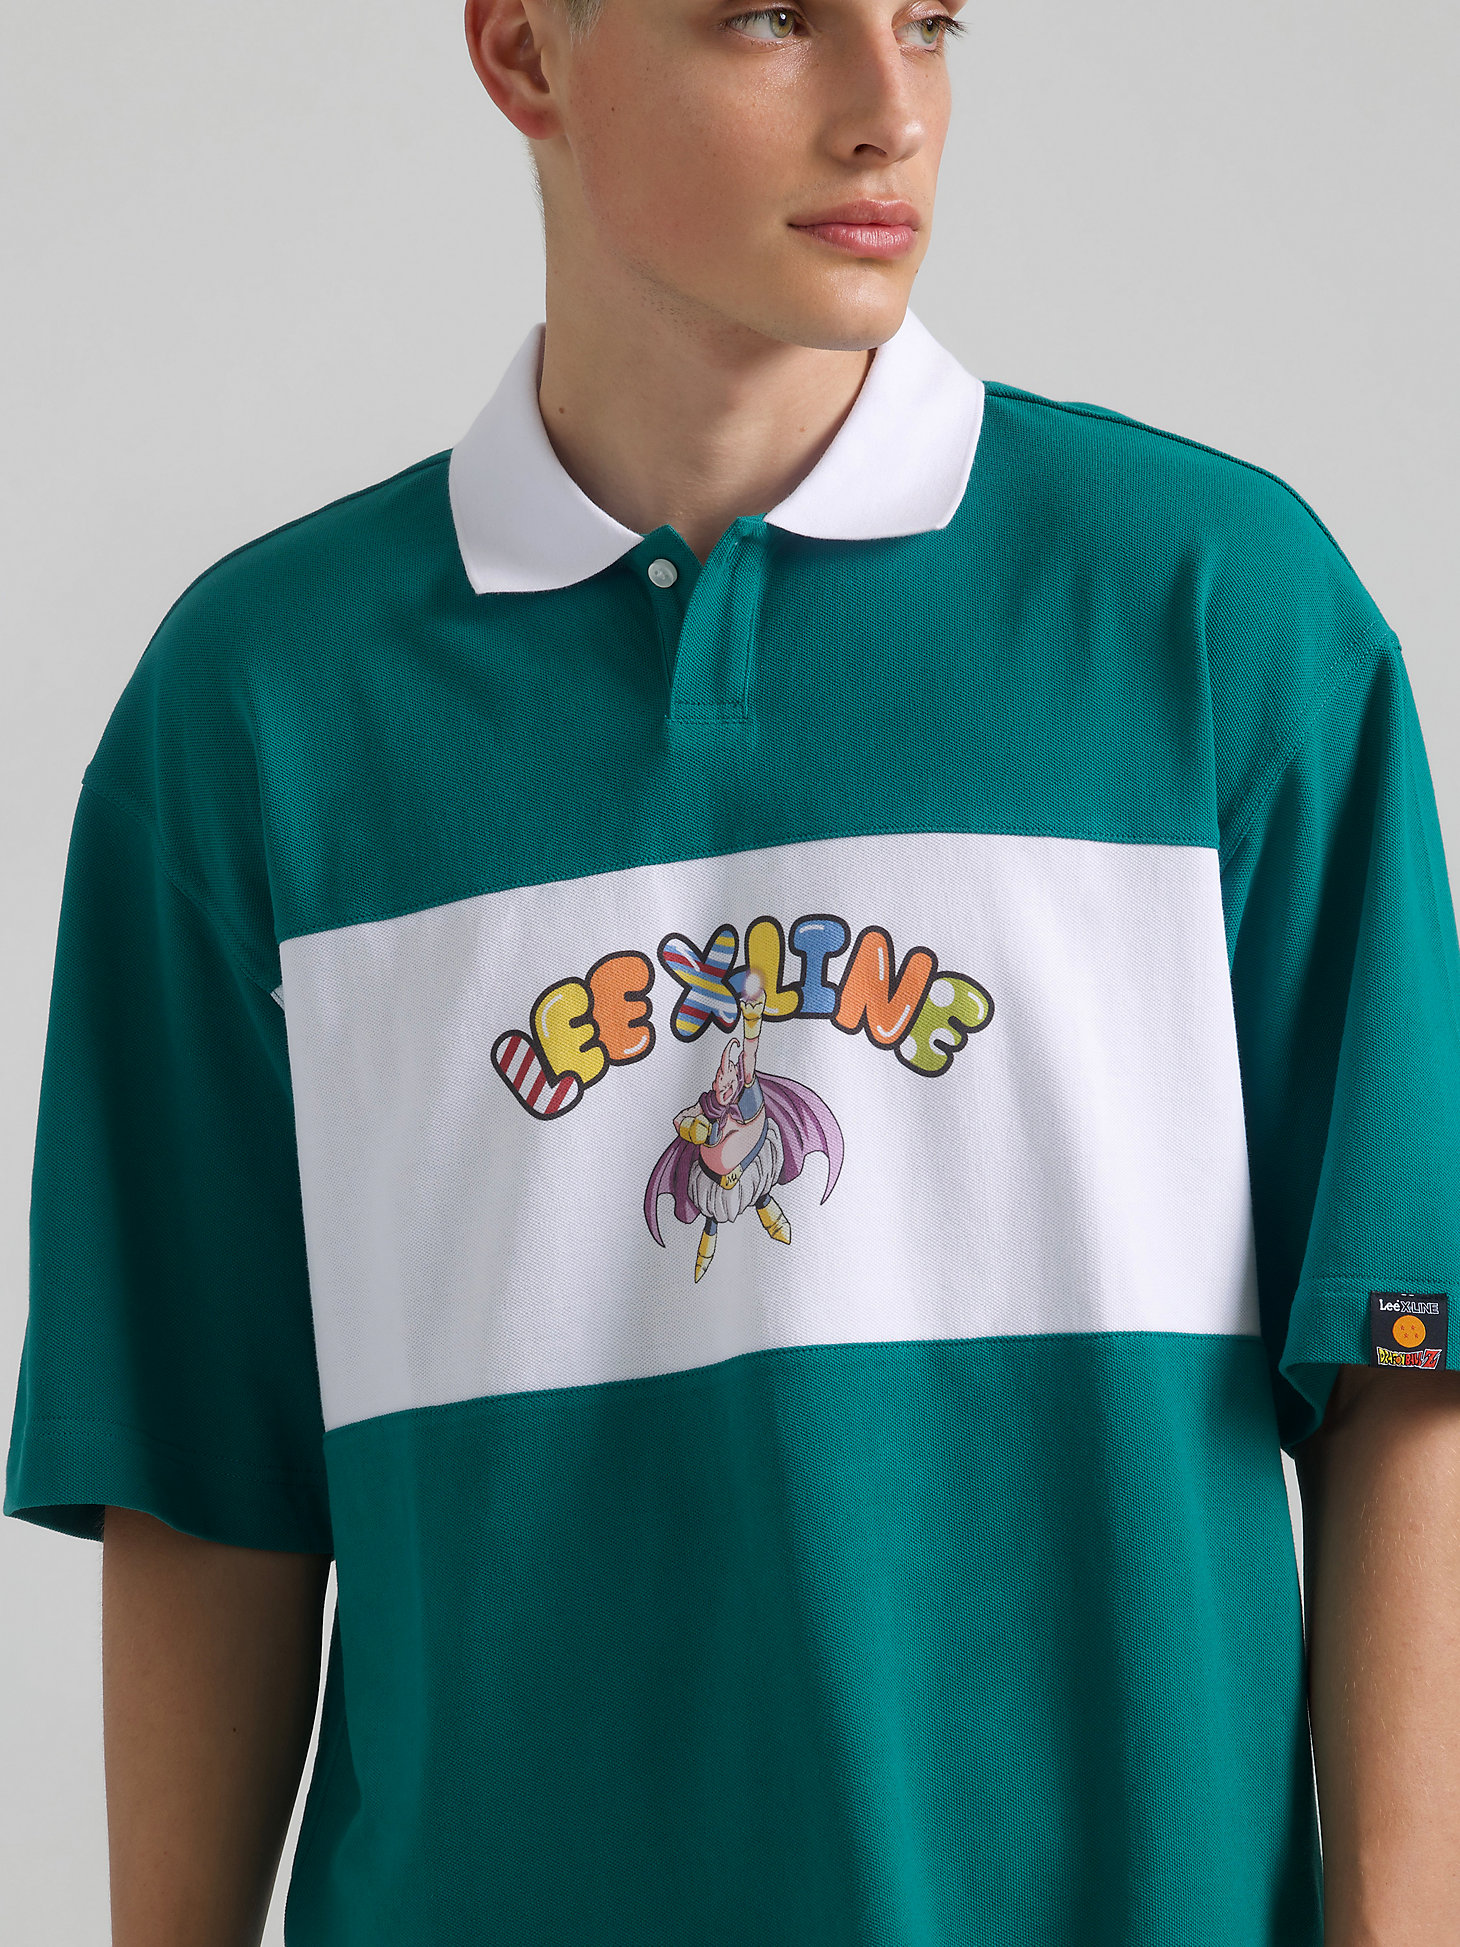 Unisex Lee and Dragon Ball Z Fat Buu Polo in Teal Green alternative view 4